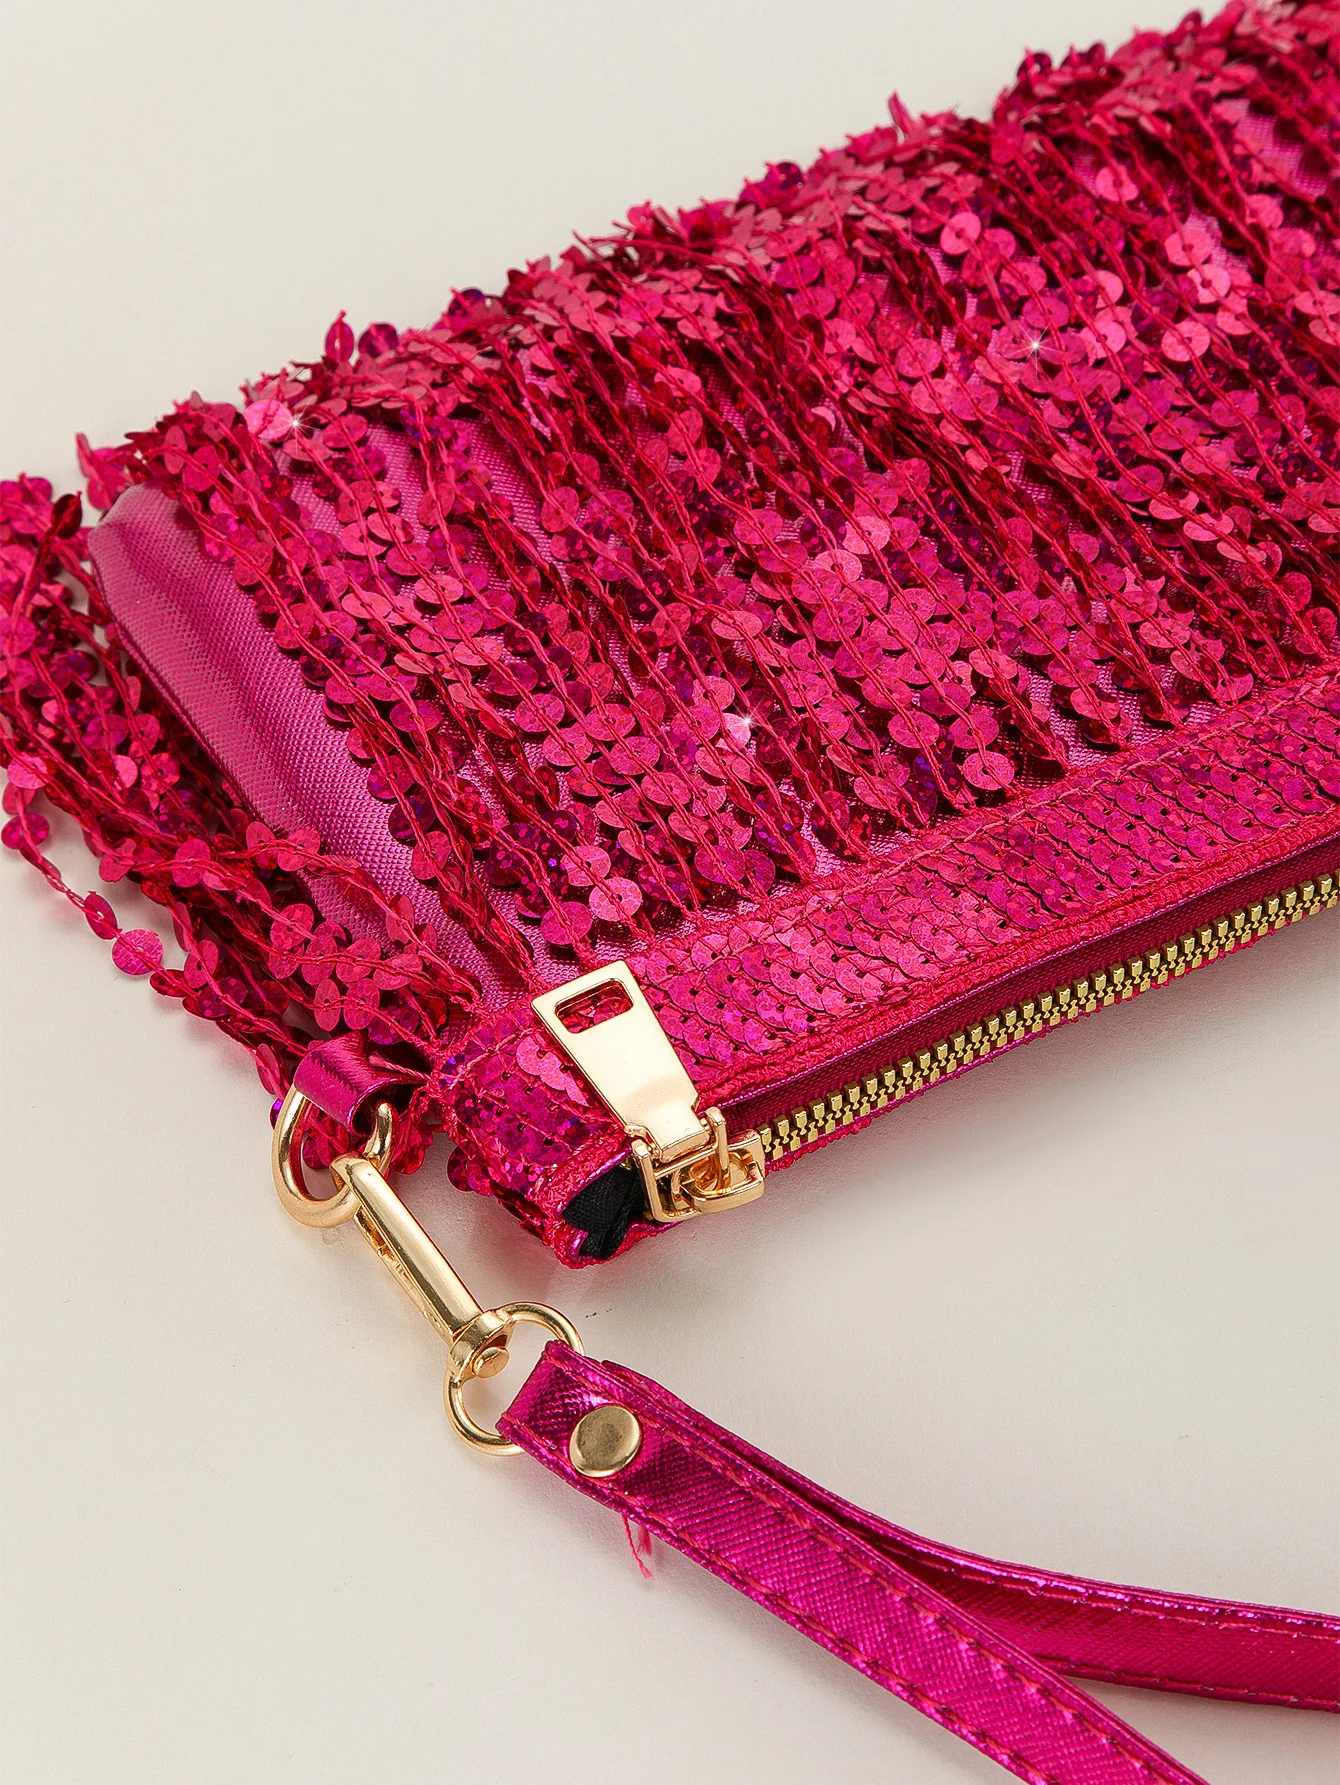 Coach Poppy Pink Sequin Limited Edition Handbag | Purses, Coach purses,  Need this